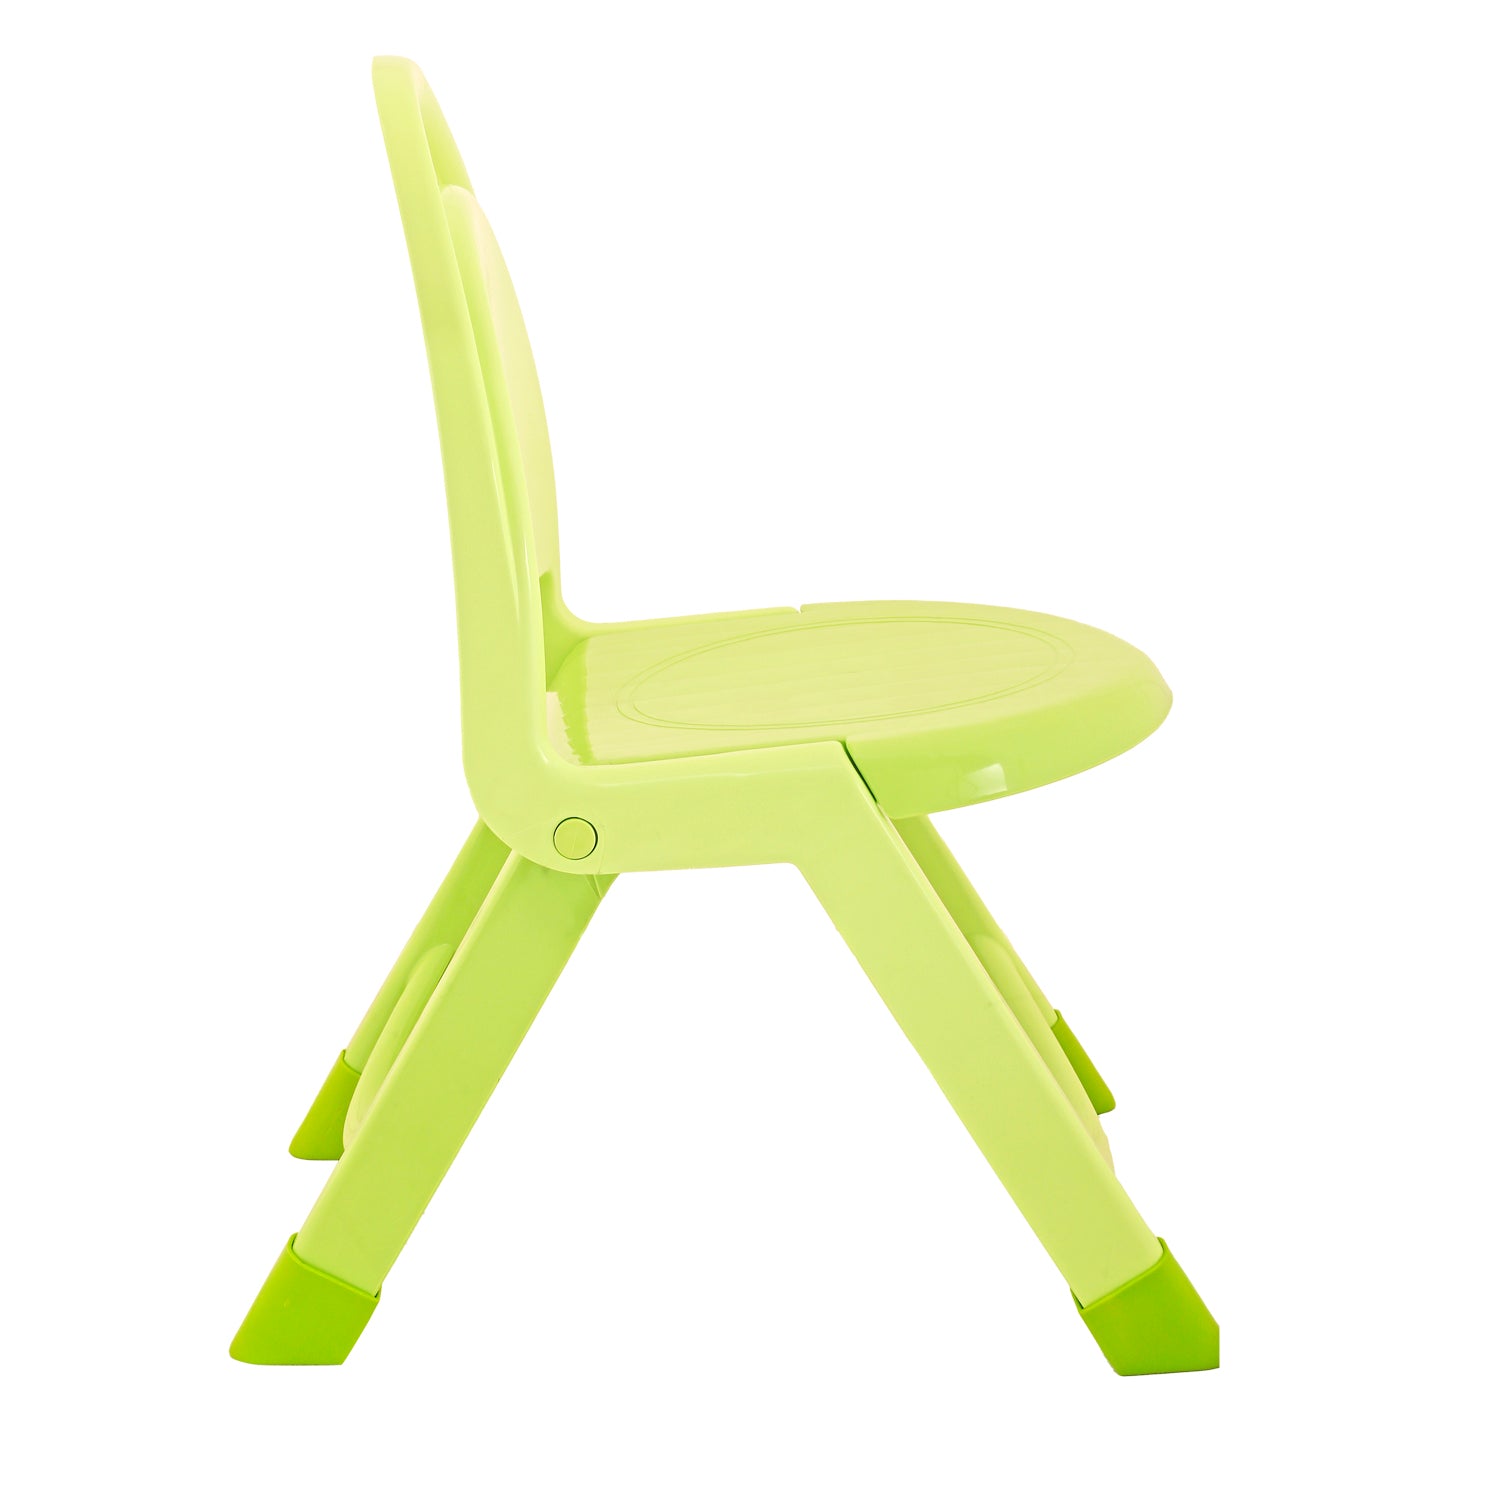 Foldable Multipurpose Green Chair - Baby Moo